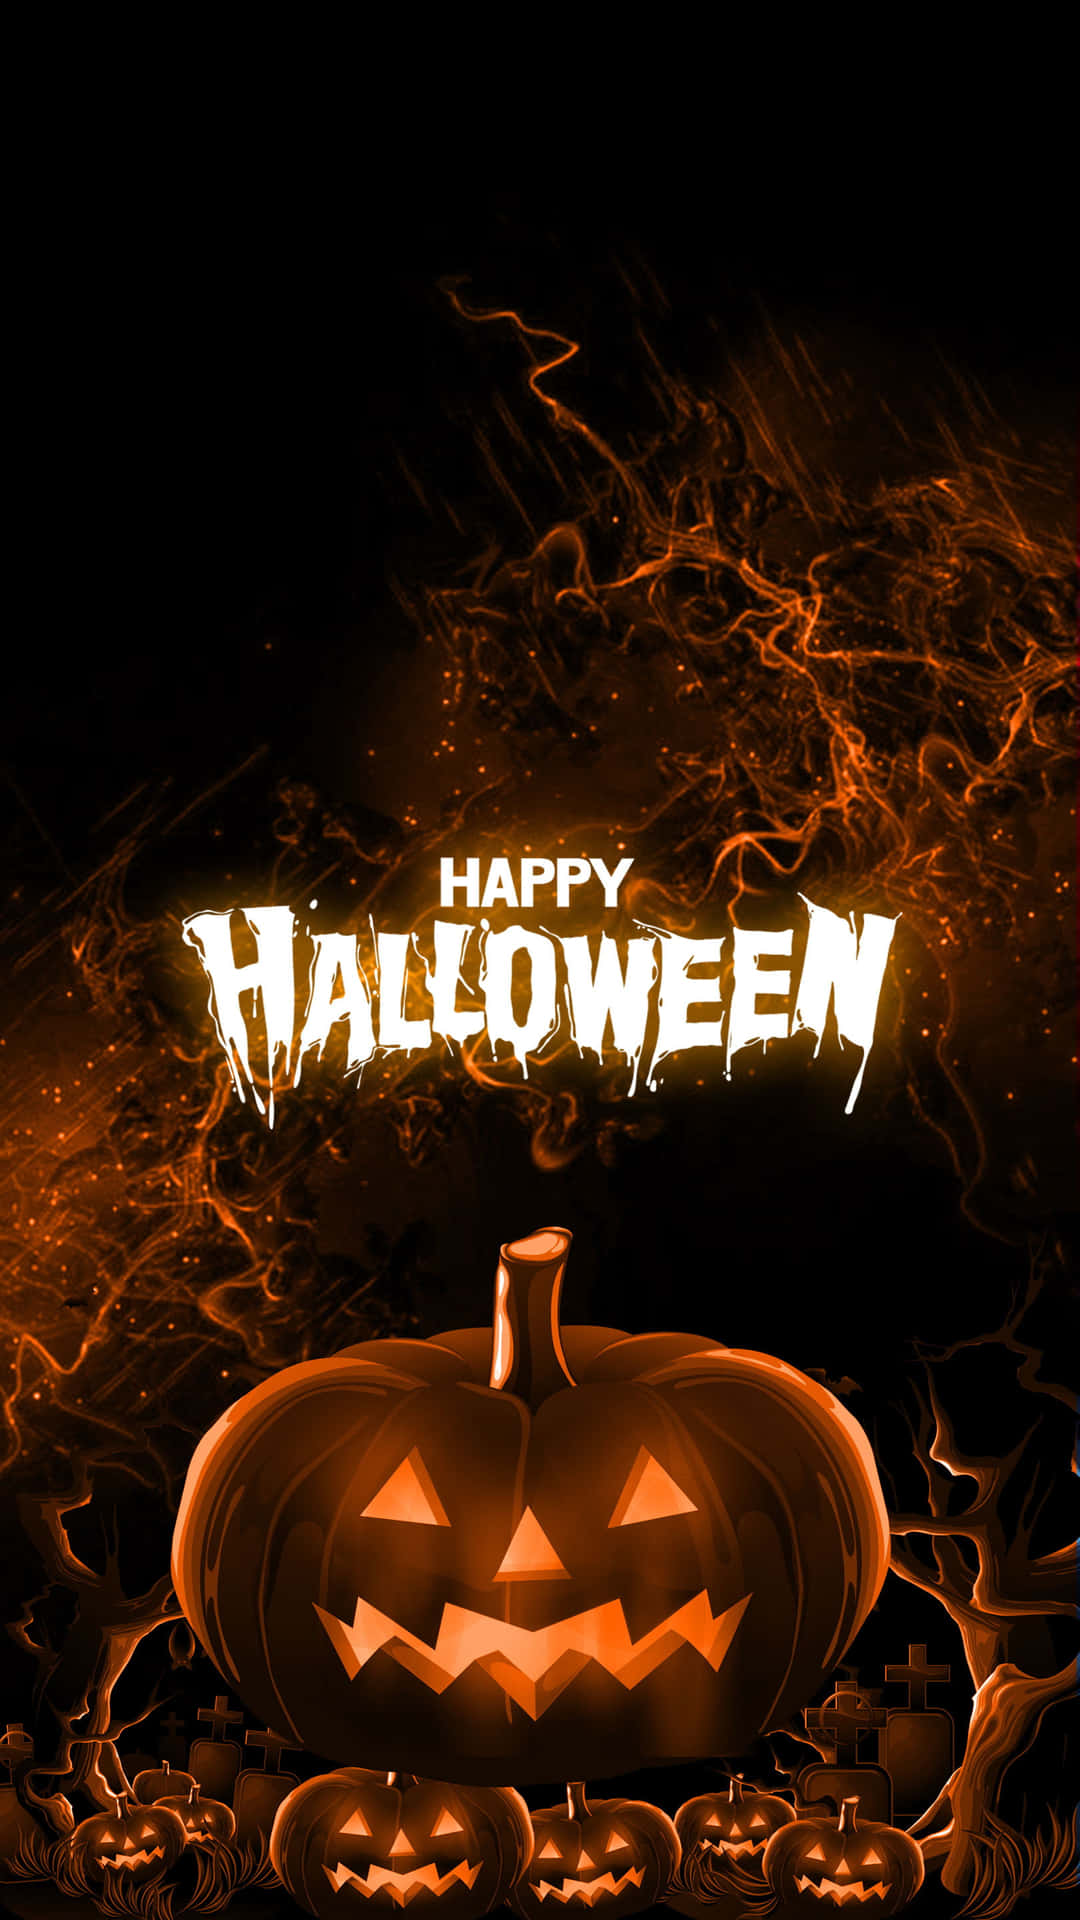 Have a Fun and Spooky Halloween!